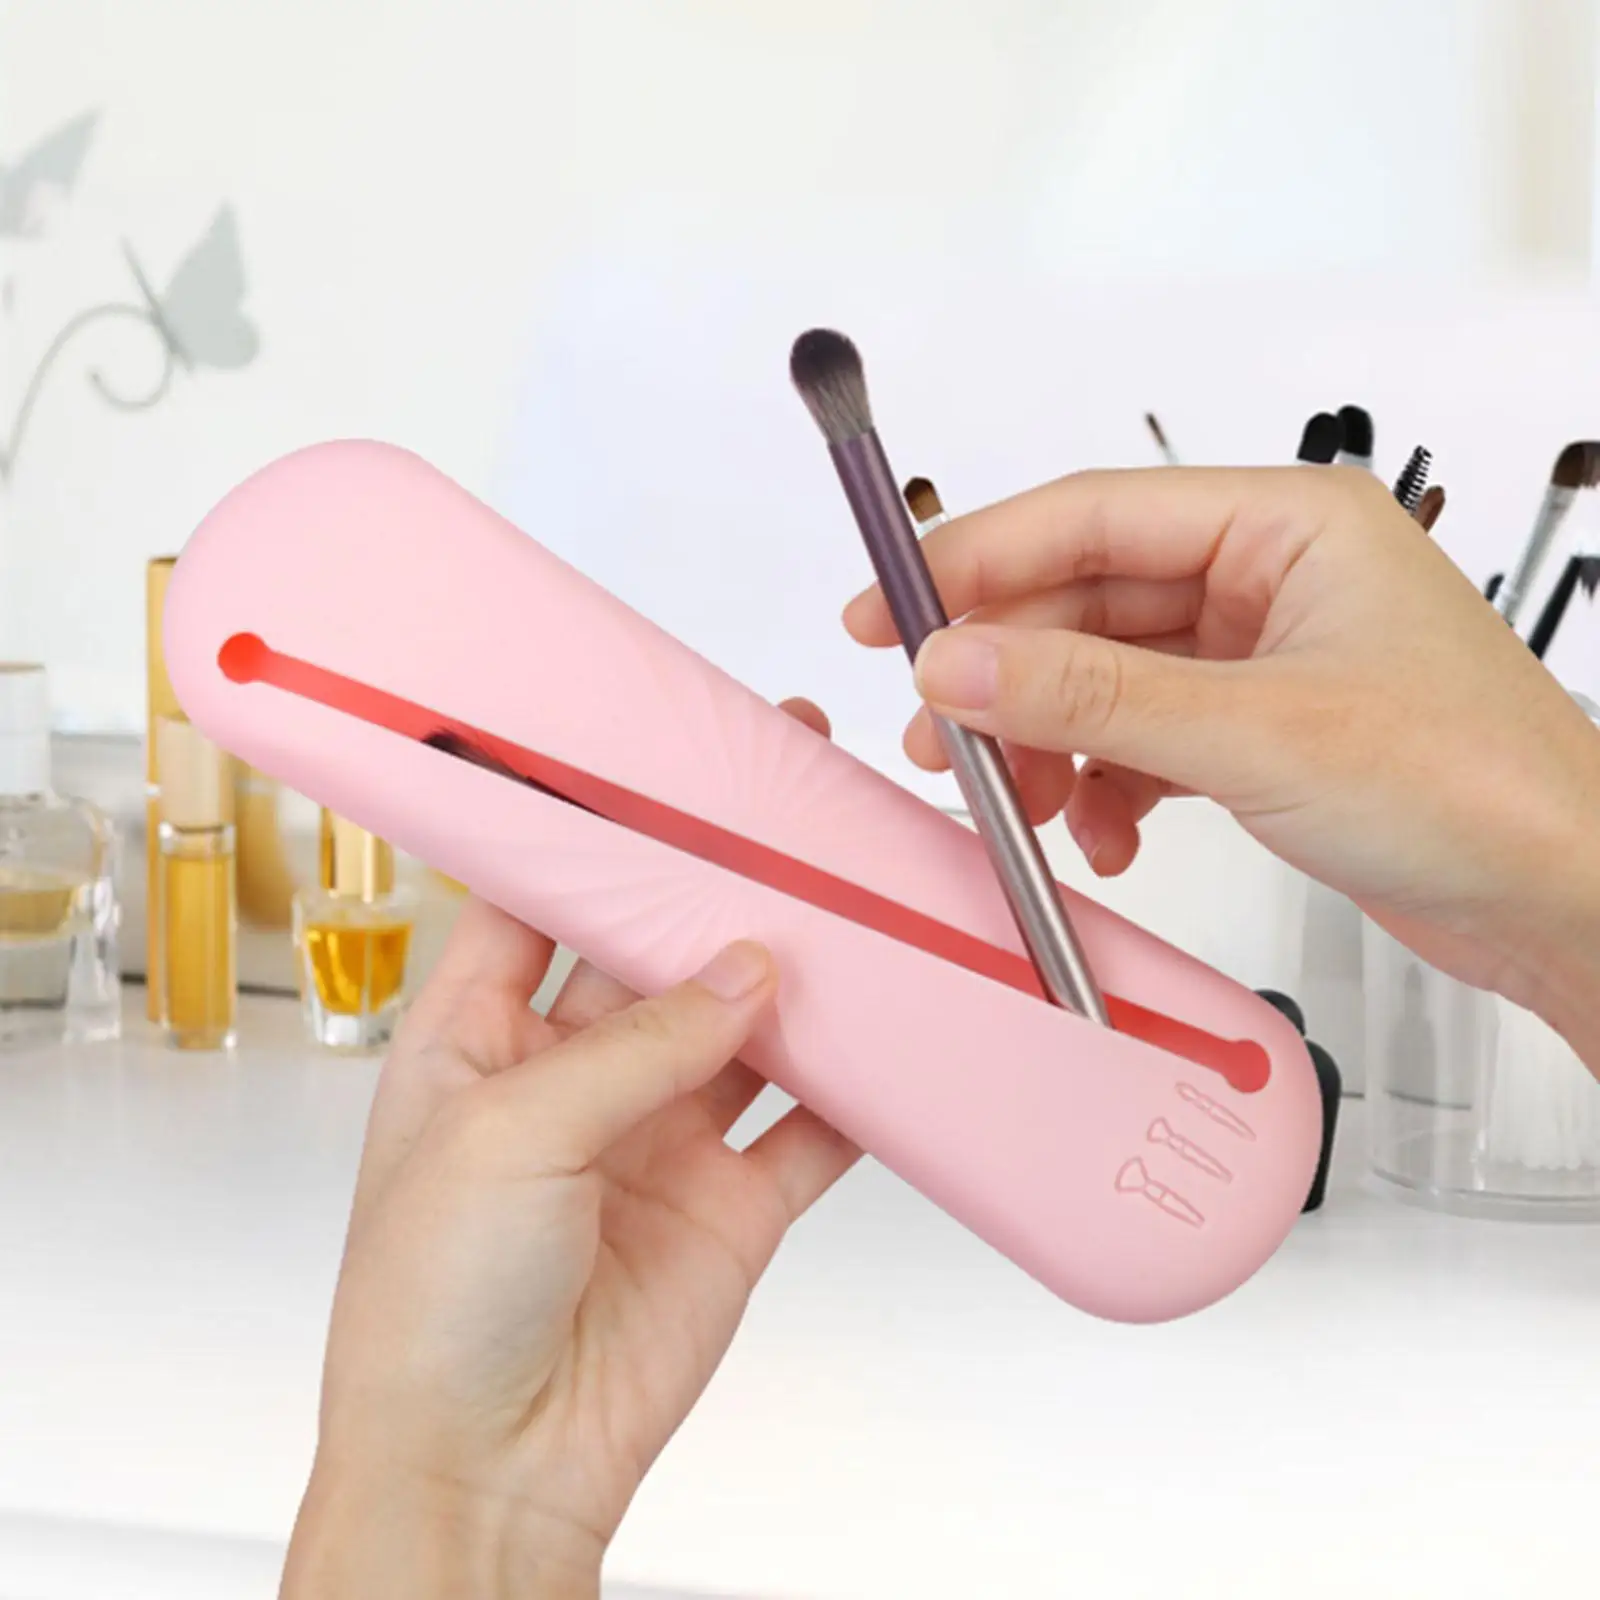 Makeup Brush Holder Cosmetics Holders Storage for Professional Artist Woman